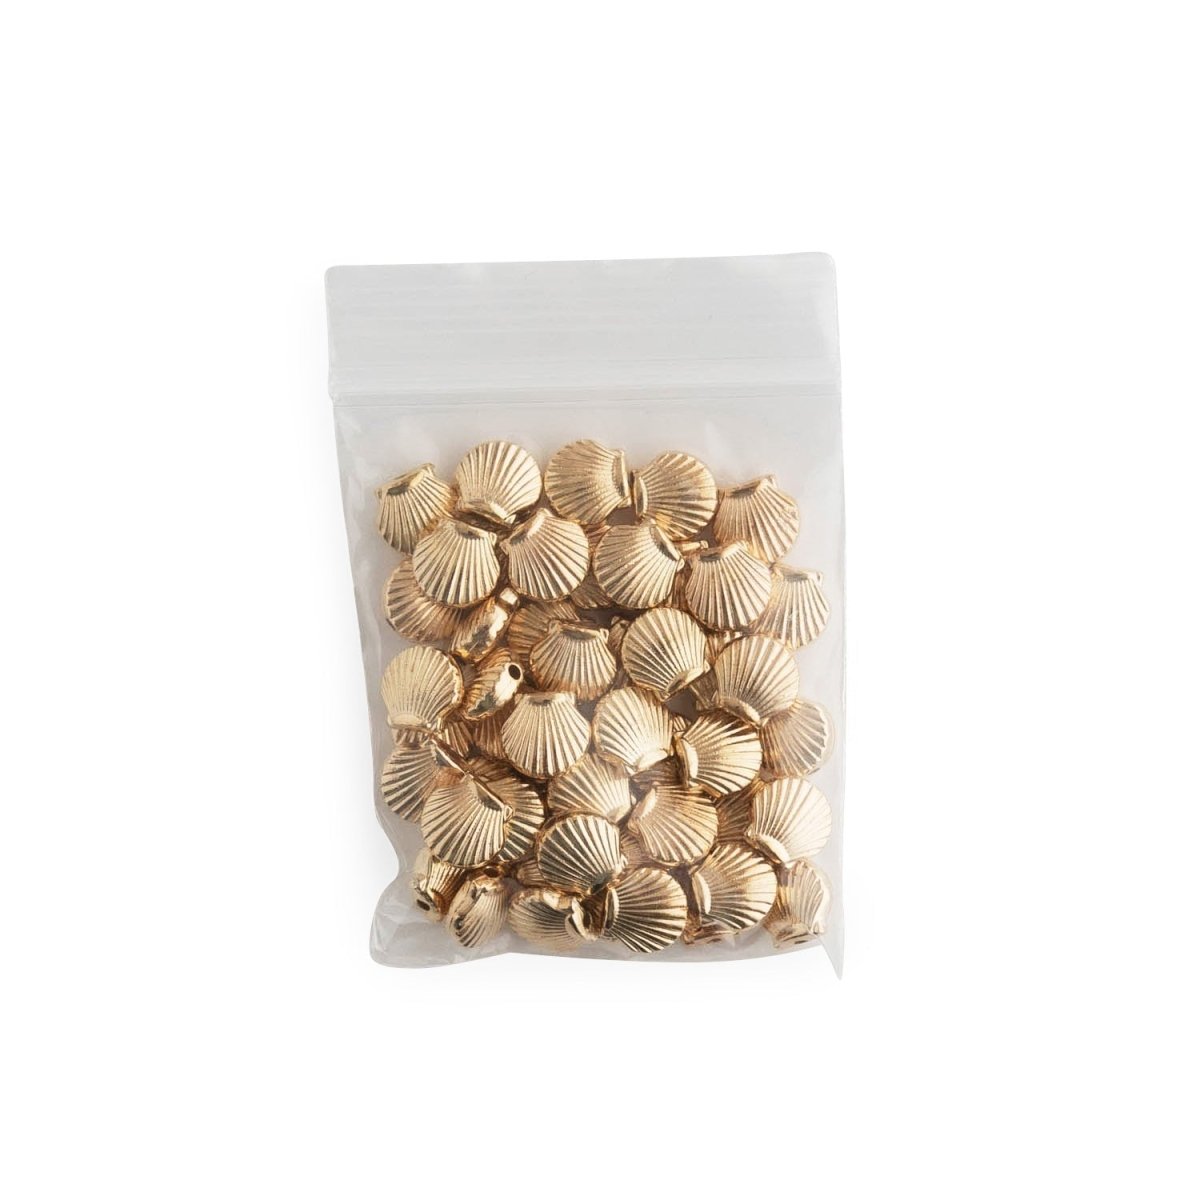 Accent Beads Sea Shells from Cara & Co Craft Supply